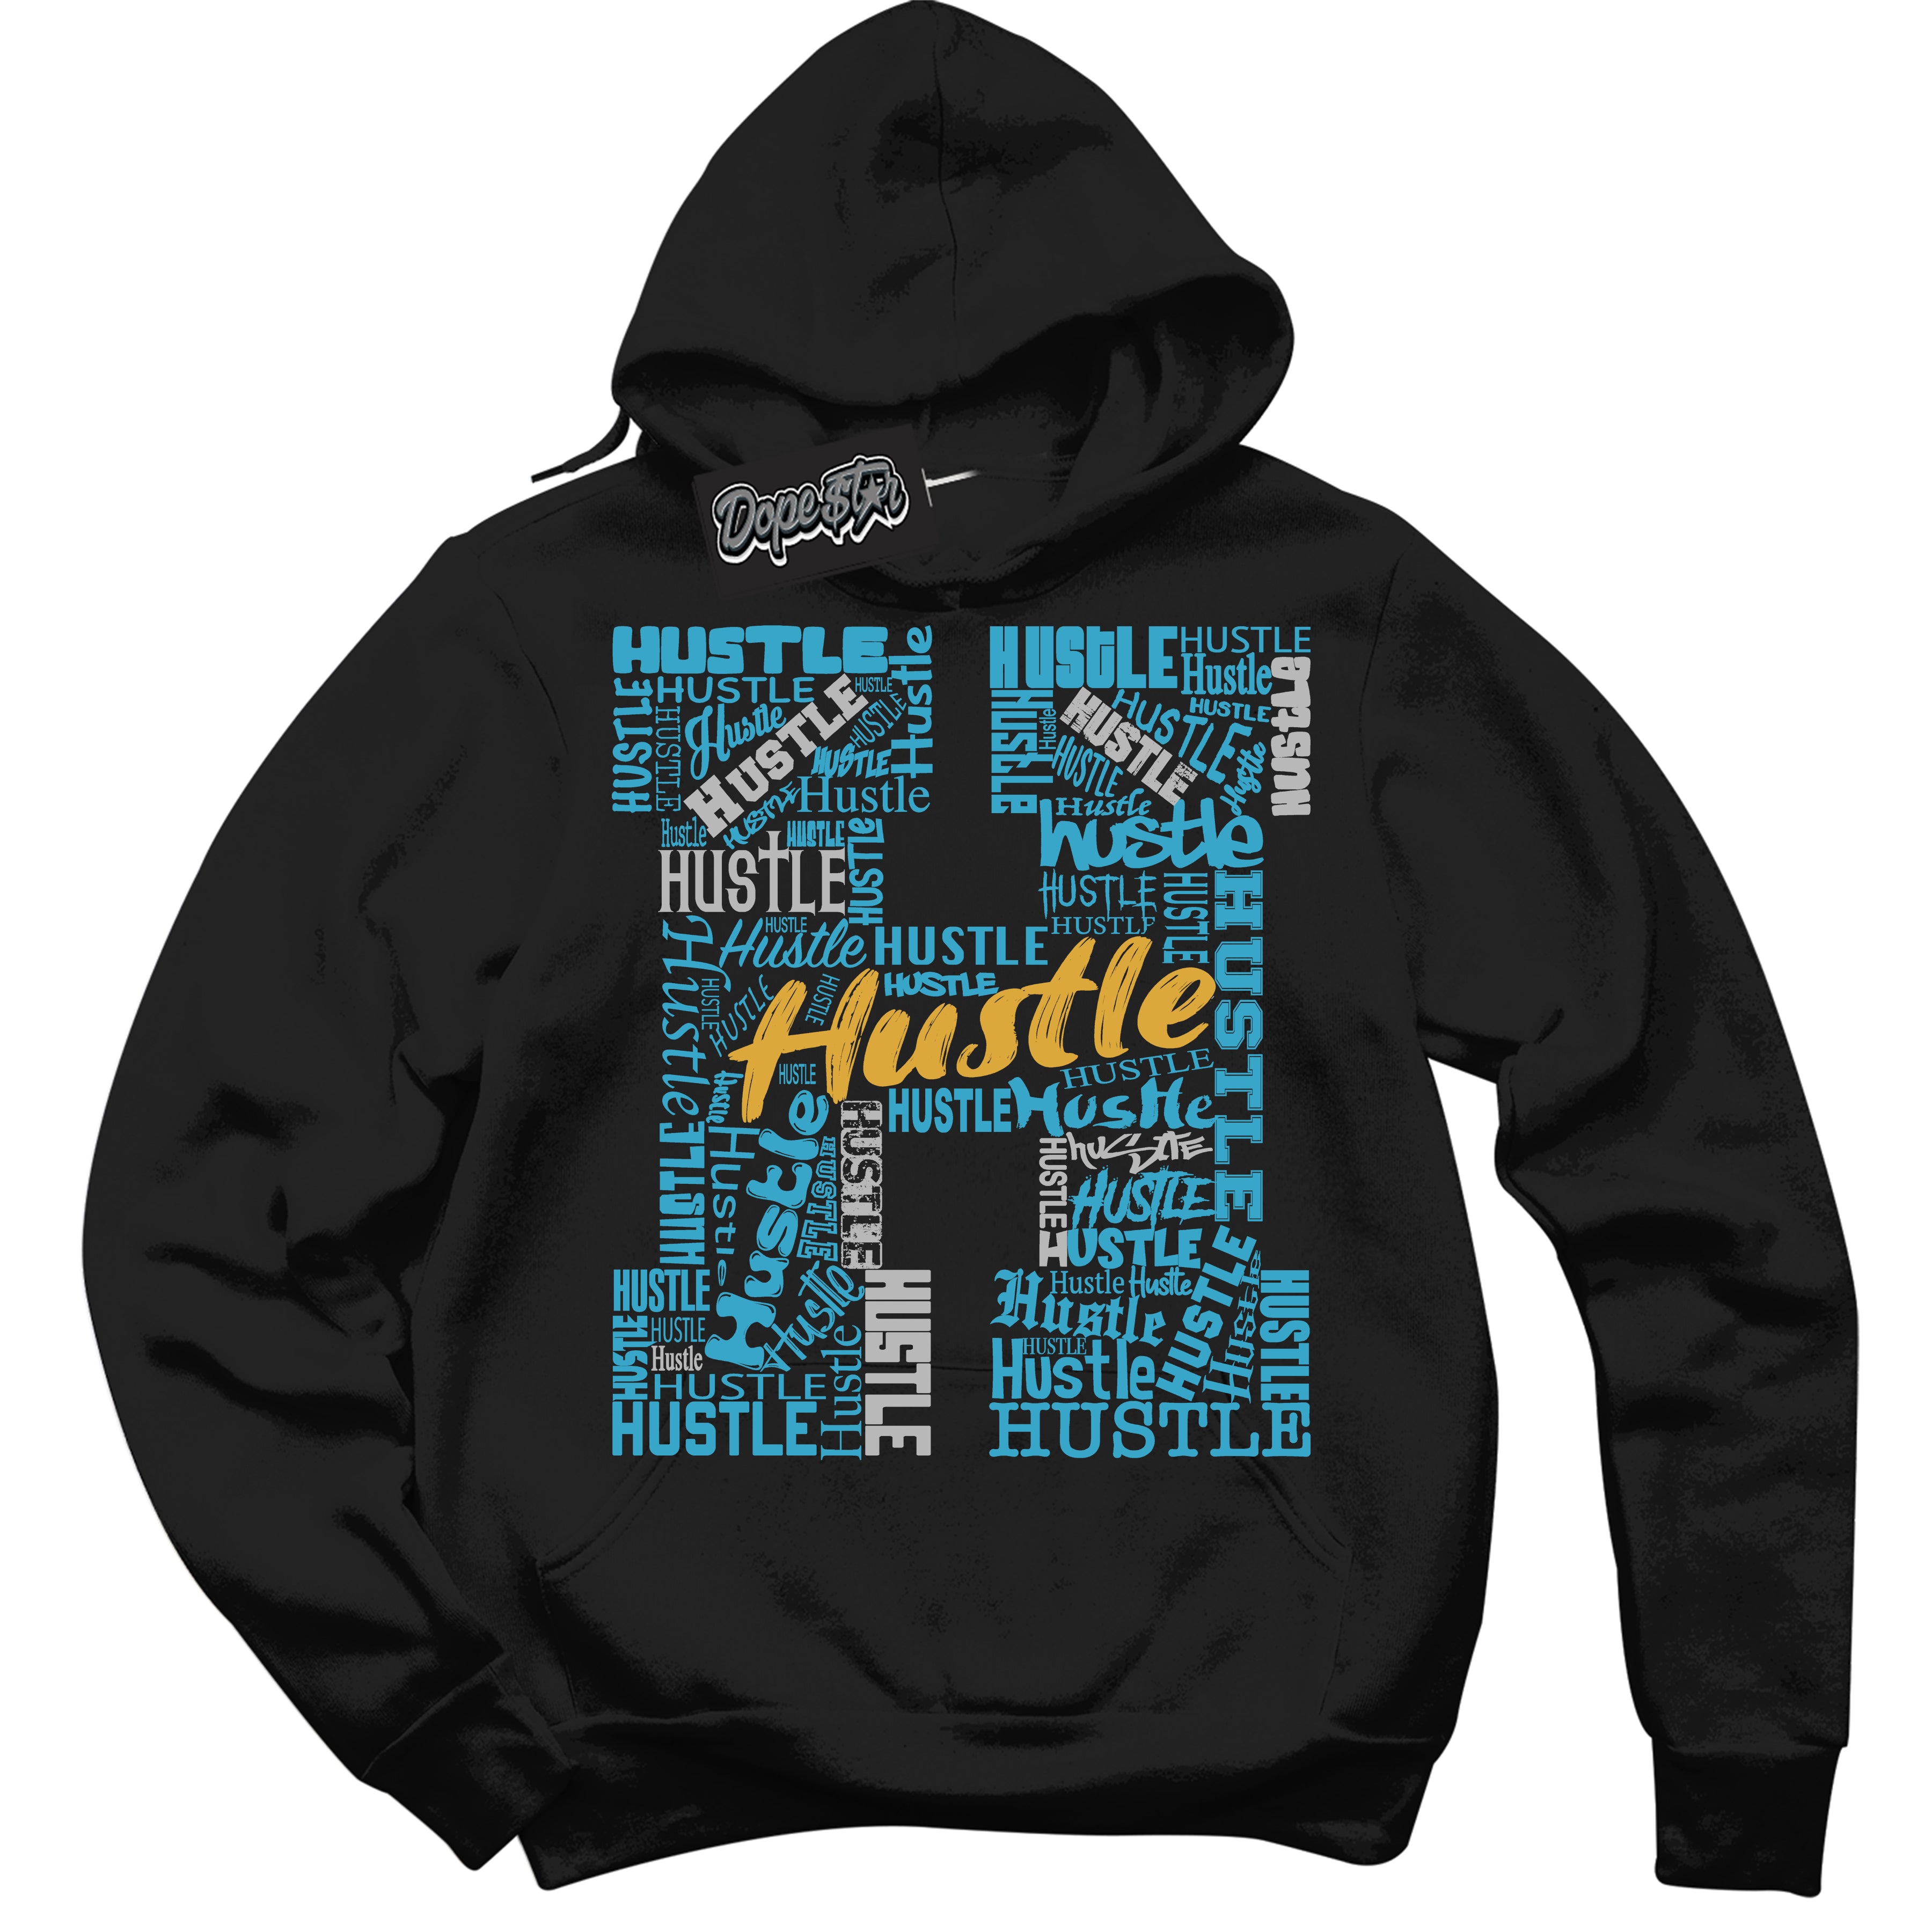 Cool Black Graphic Hoodie with “ Hustle H “ print, that perfectly matches Air Jordan 5 AQUA  sneakers